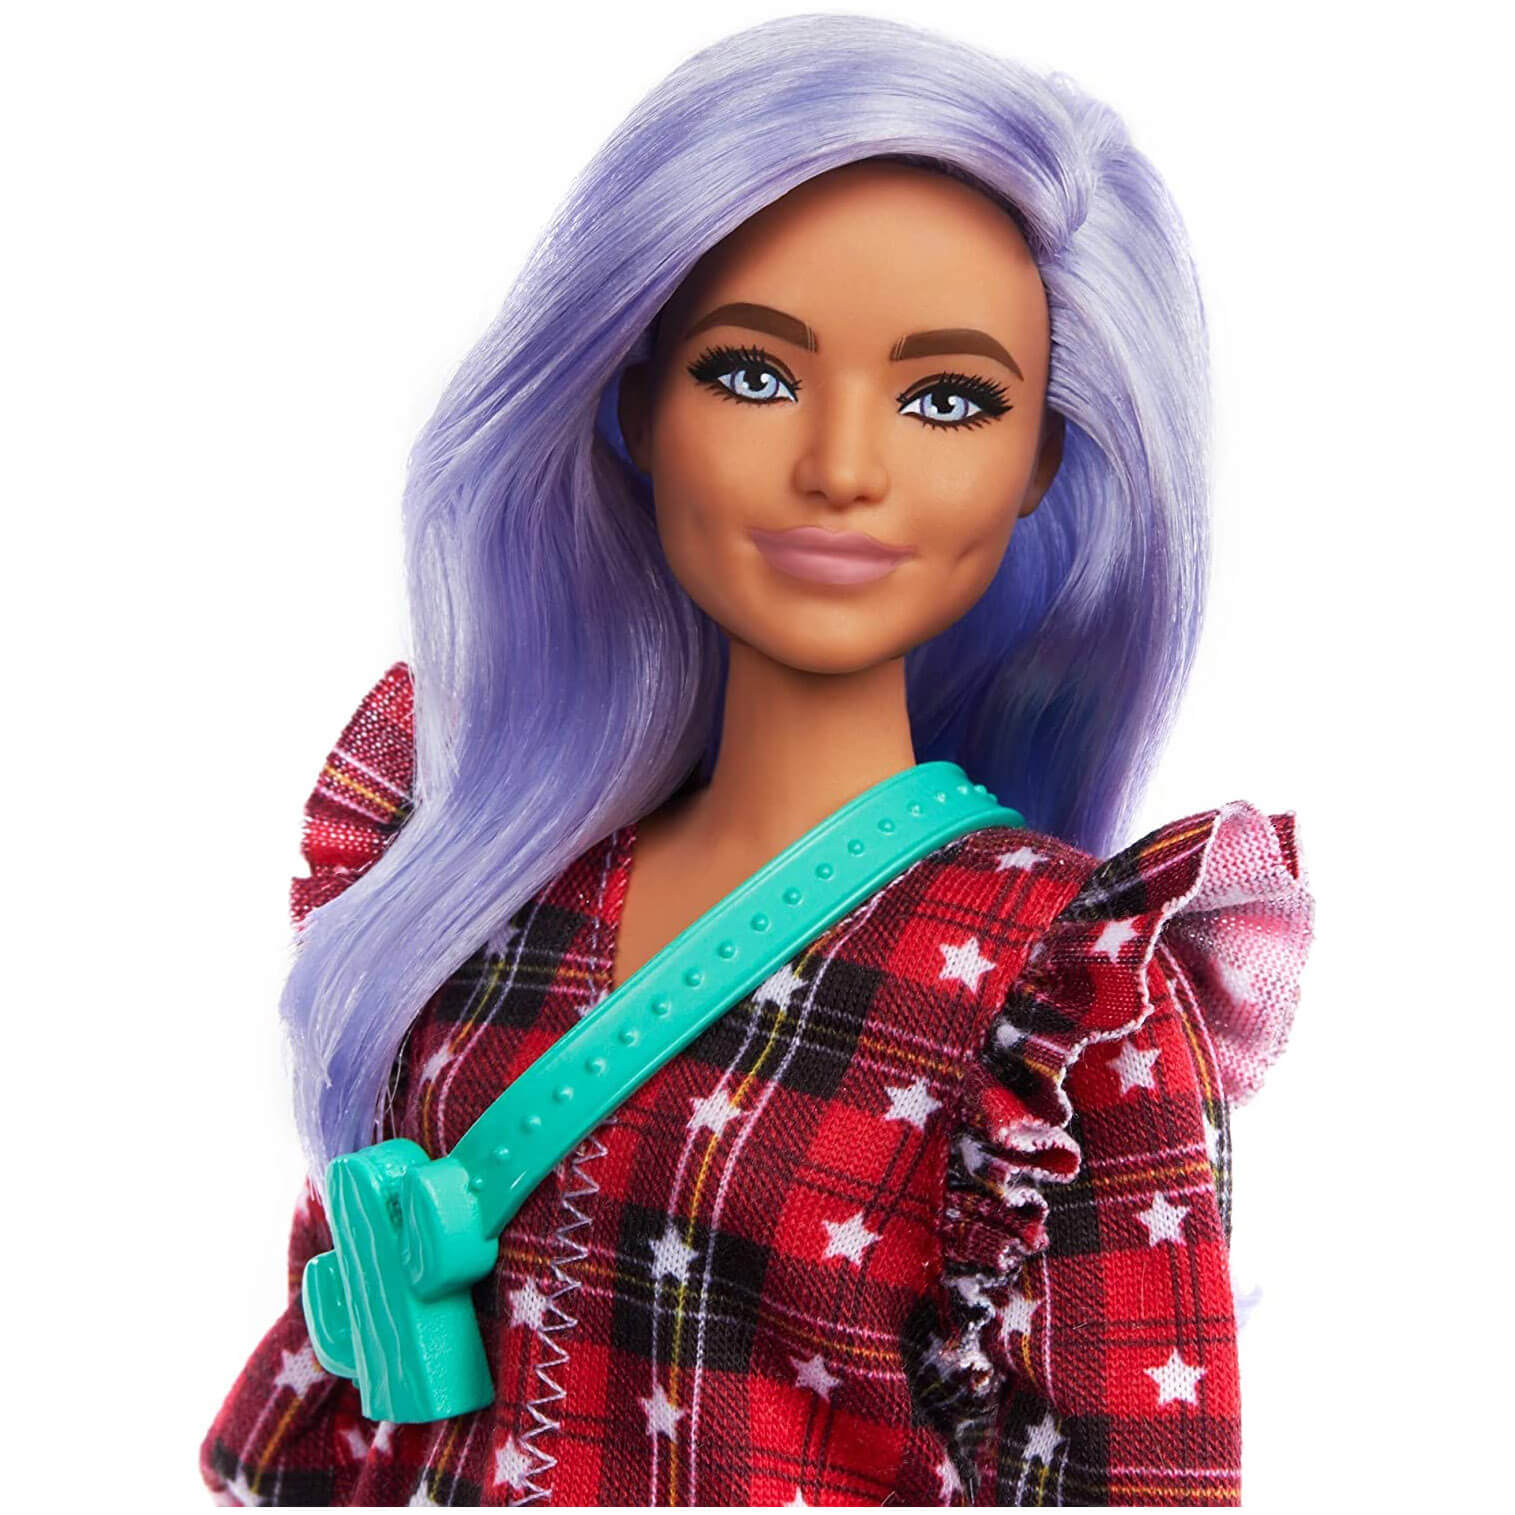 Barbie Fashionistas Doll Styles May Vary FBR37 - Best Buy